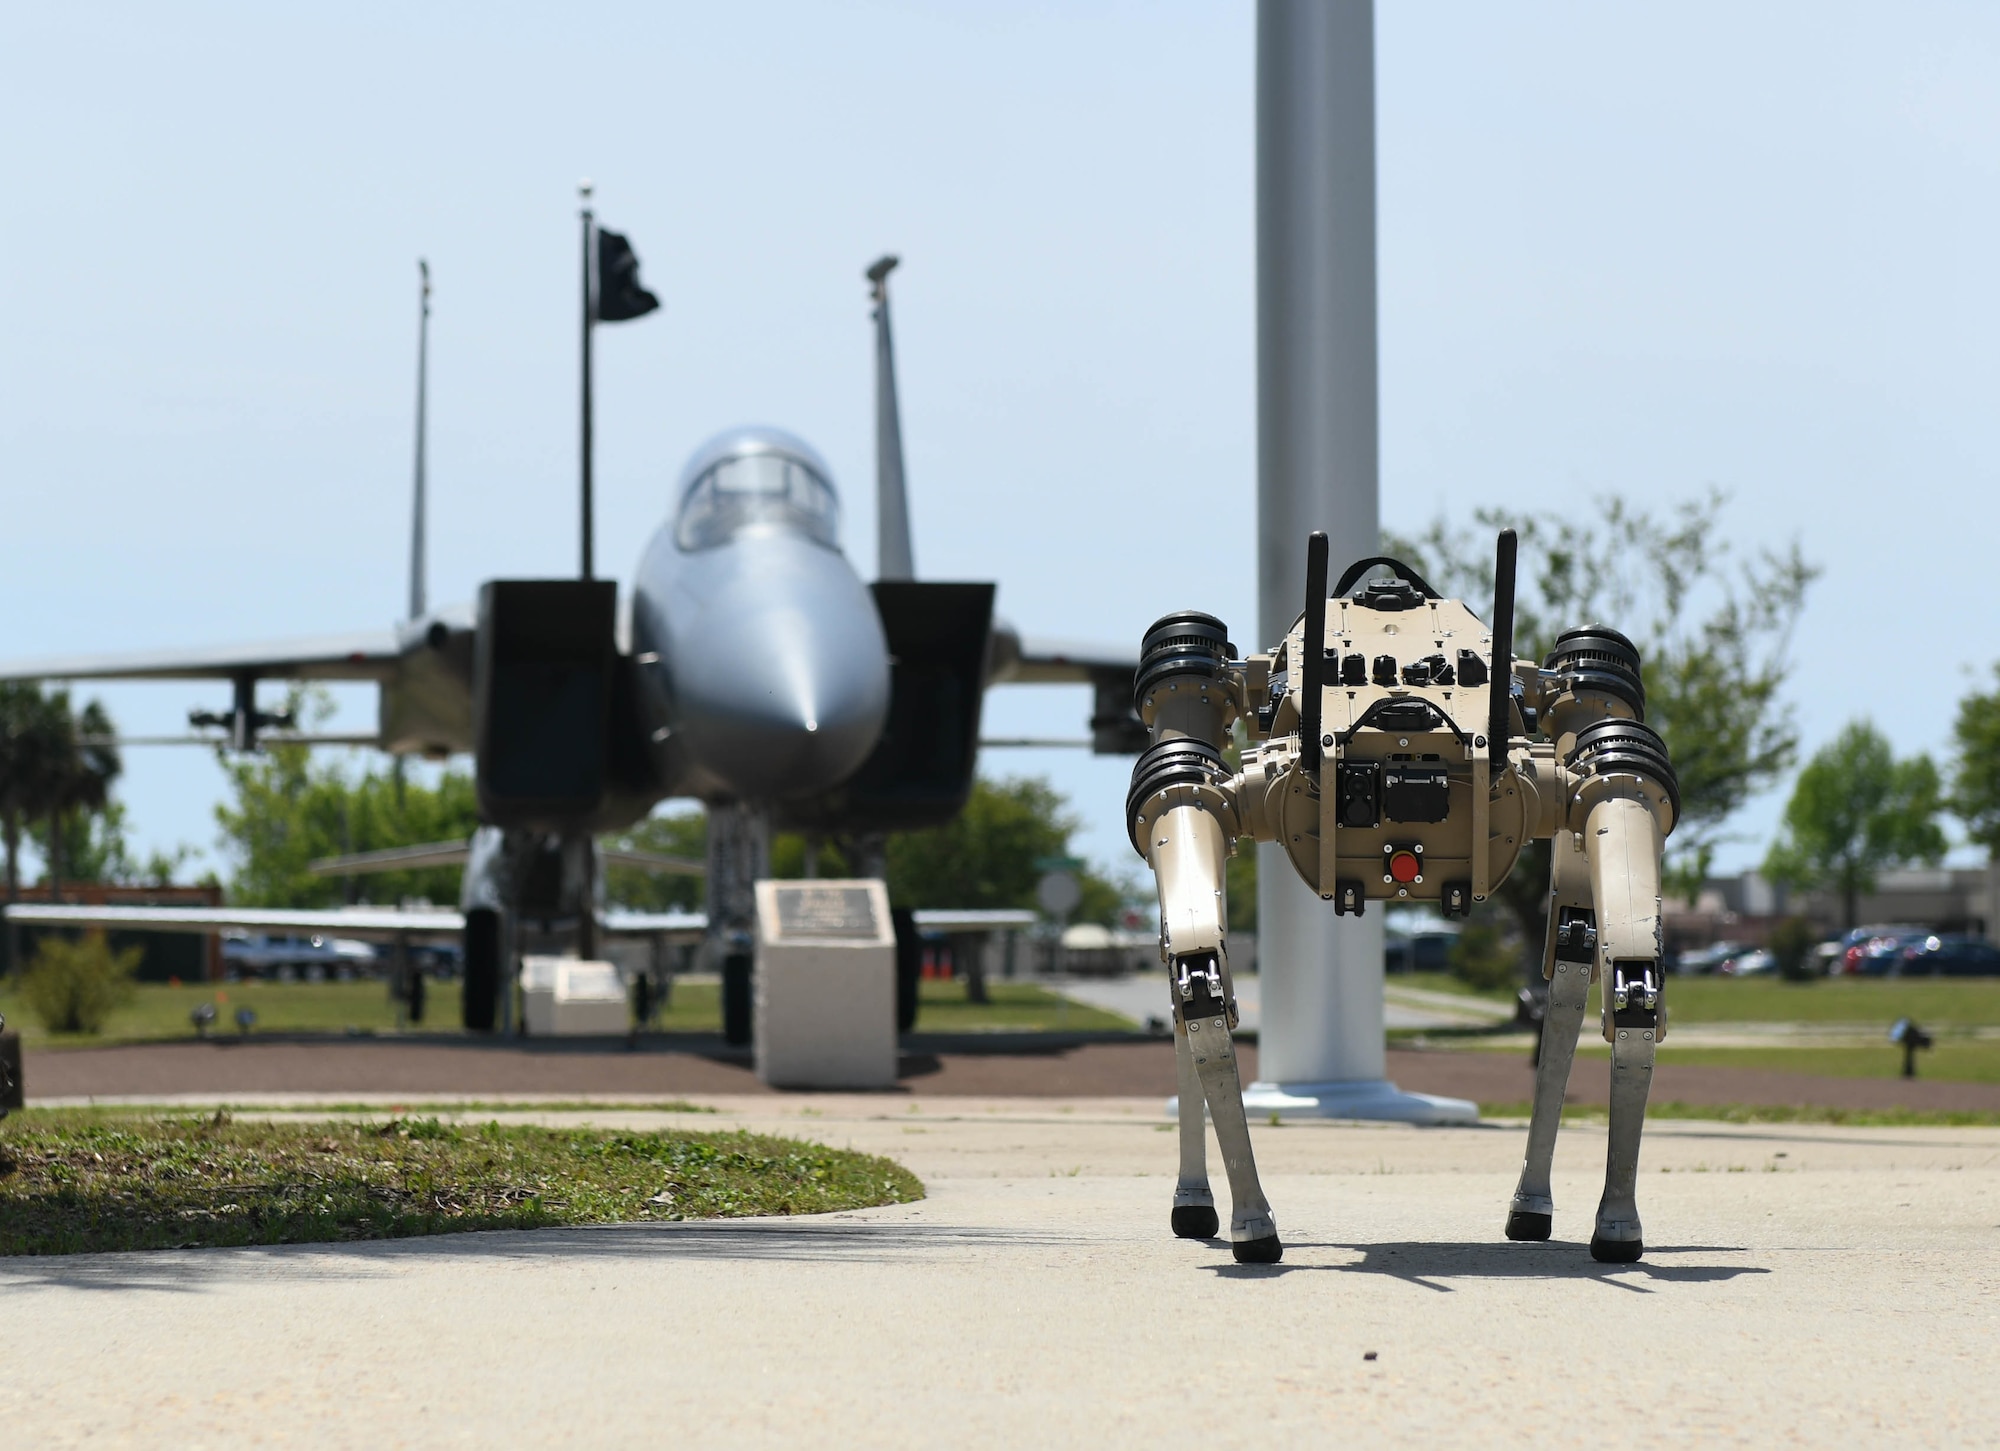 An Unmanned Quad-legged Ground Vehicle stands in front of a jet